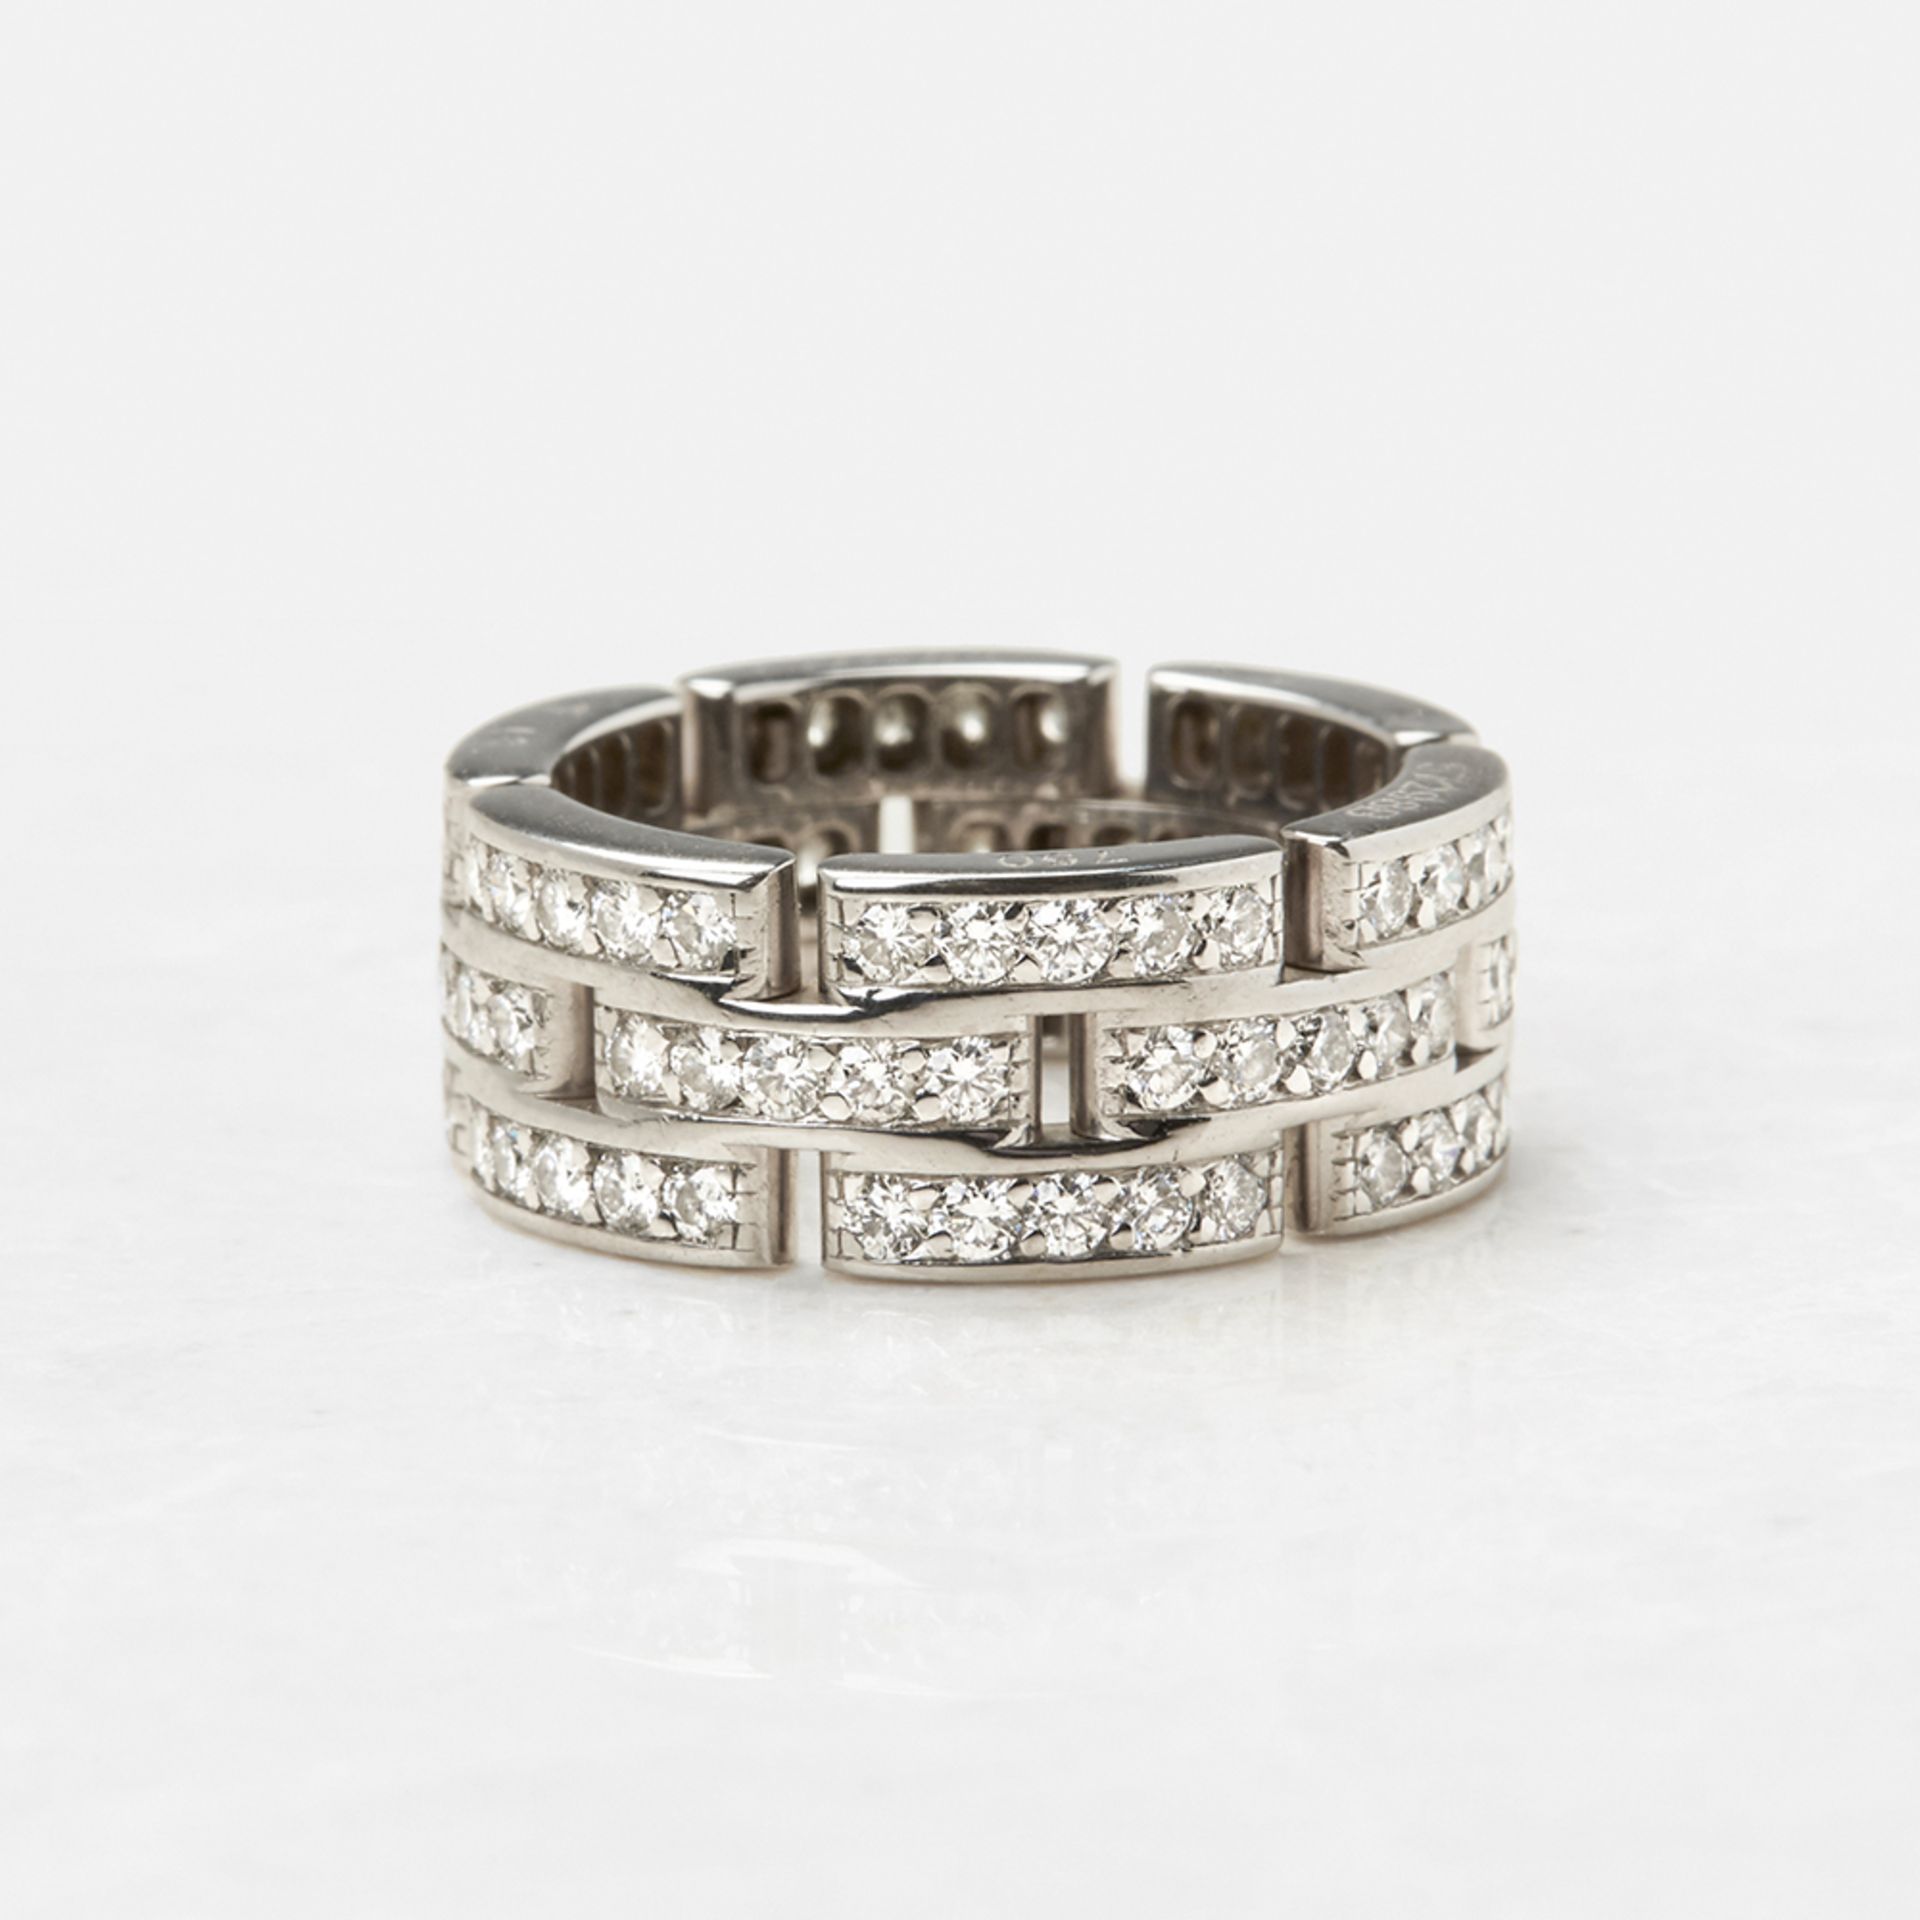 Cartier, 18k White Gold Diamond Maillon Ring - Image 3 of 9